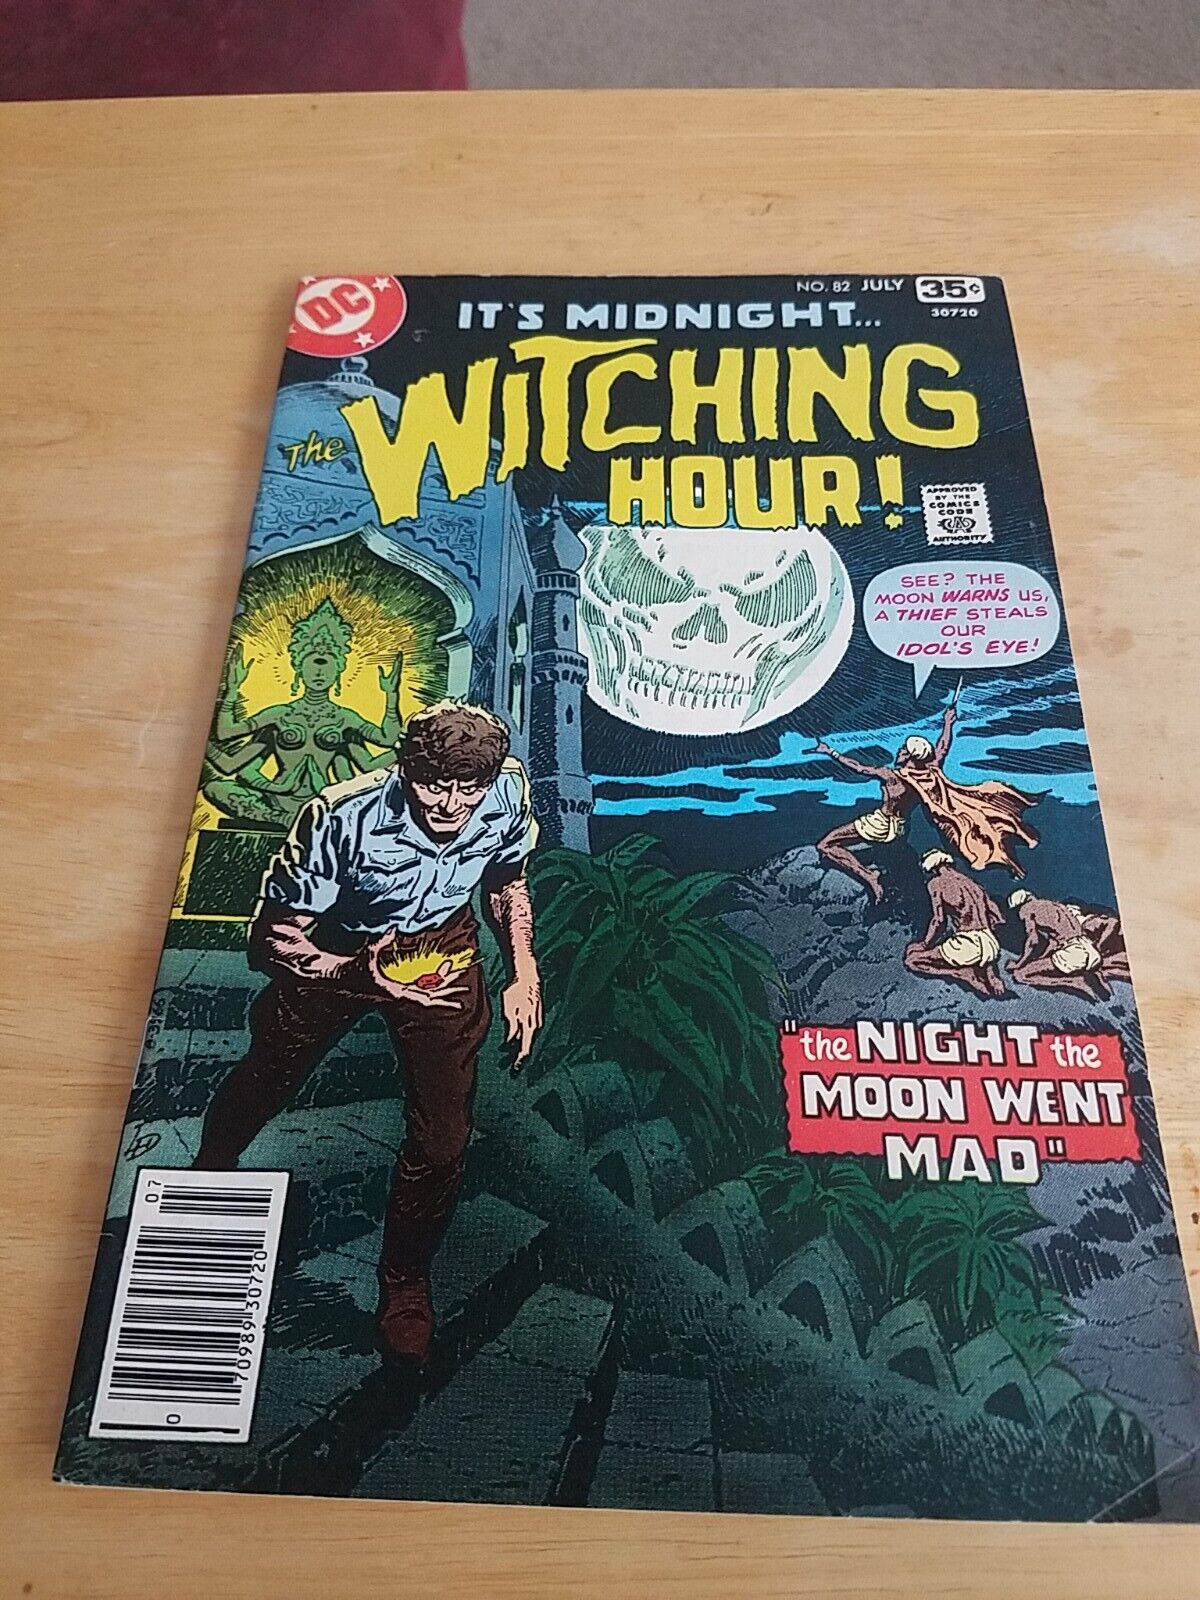 Vintage DC Comics #82 July 1978 It's Midnight The Witching Hour Comic Book 4.0 